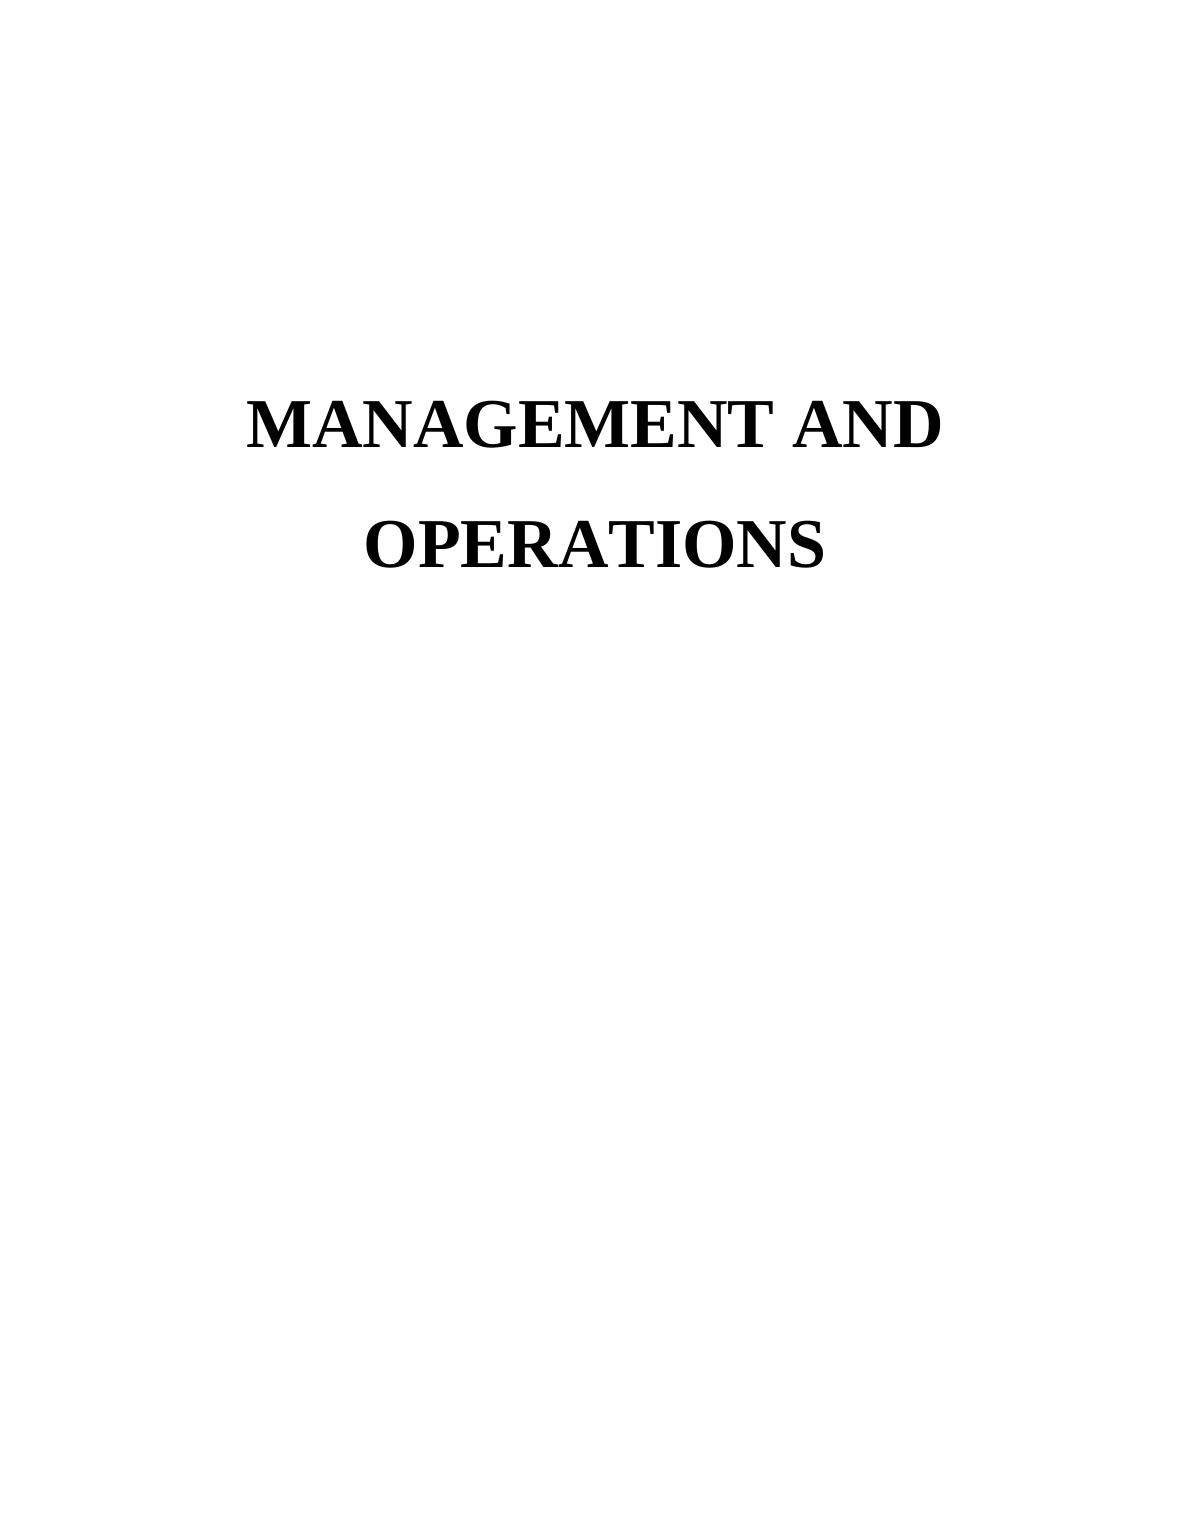 Management and Operations Assignment  Essay_1